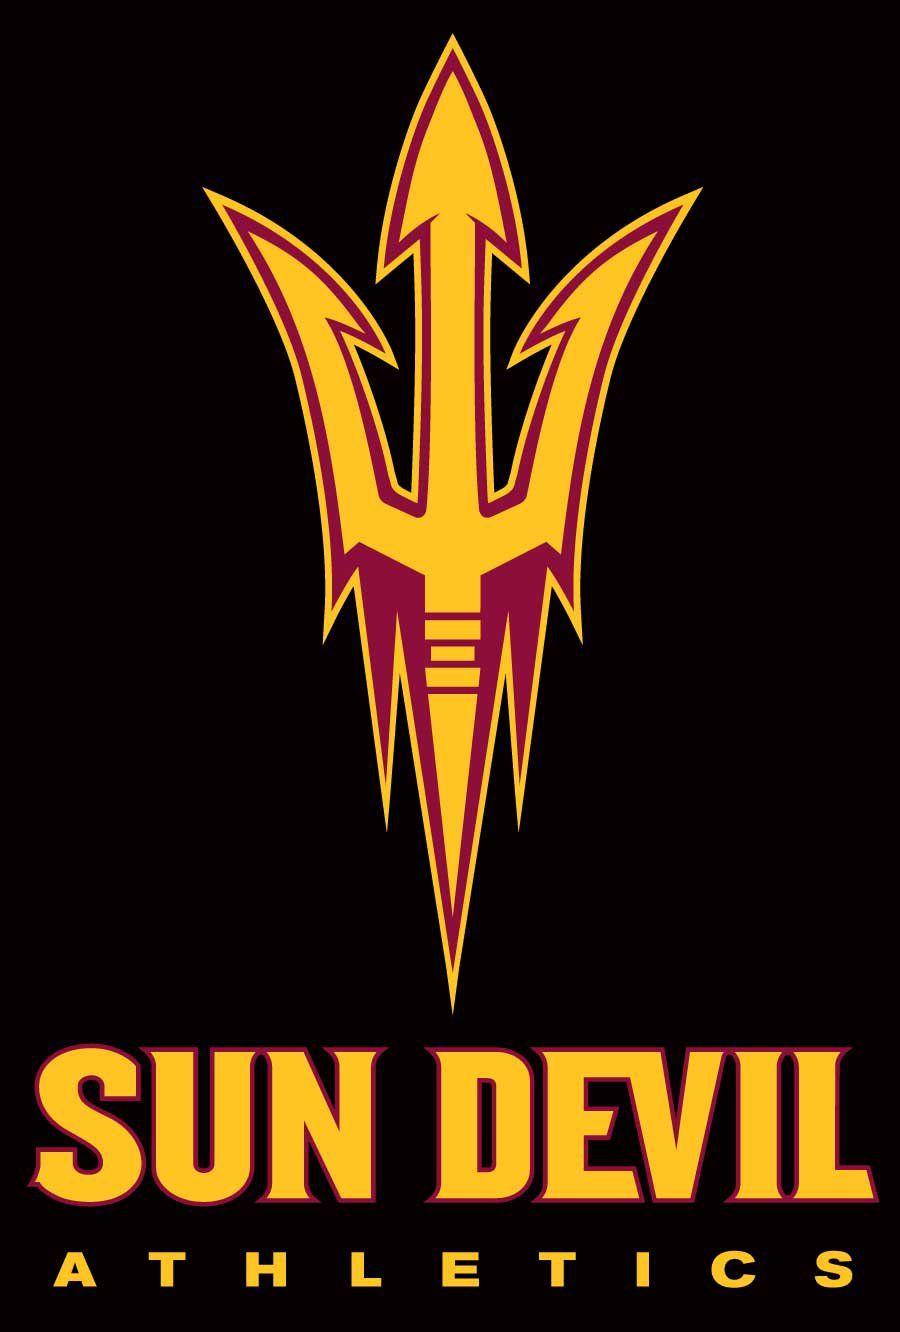 Show your Sun Devil pride with these awesome background